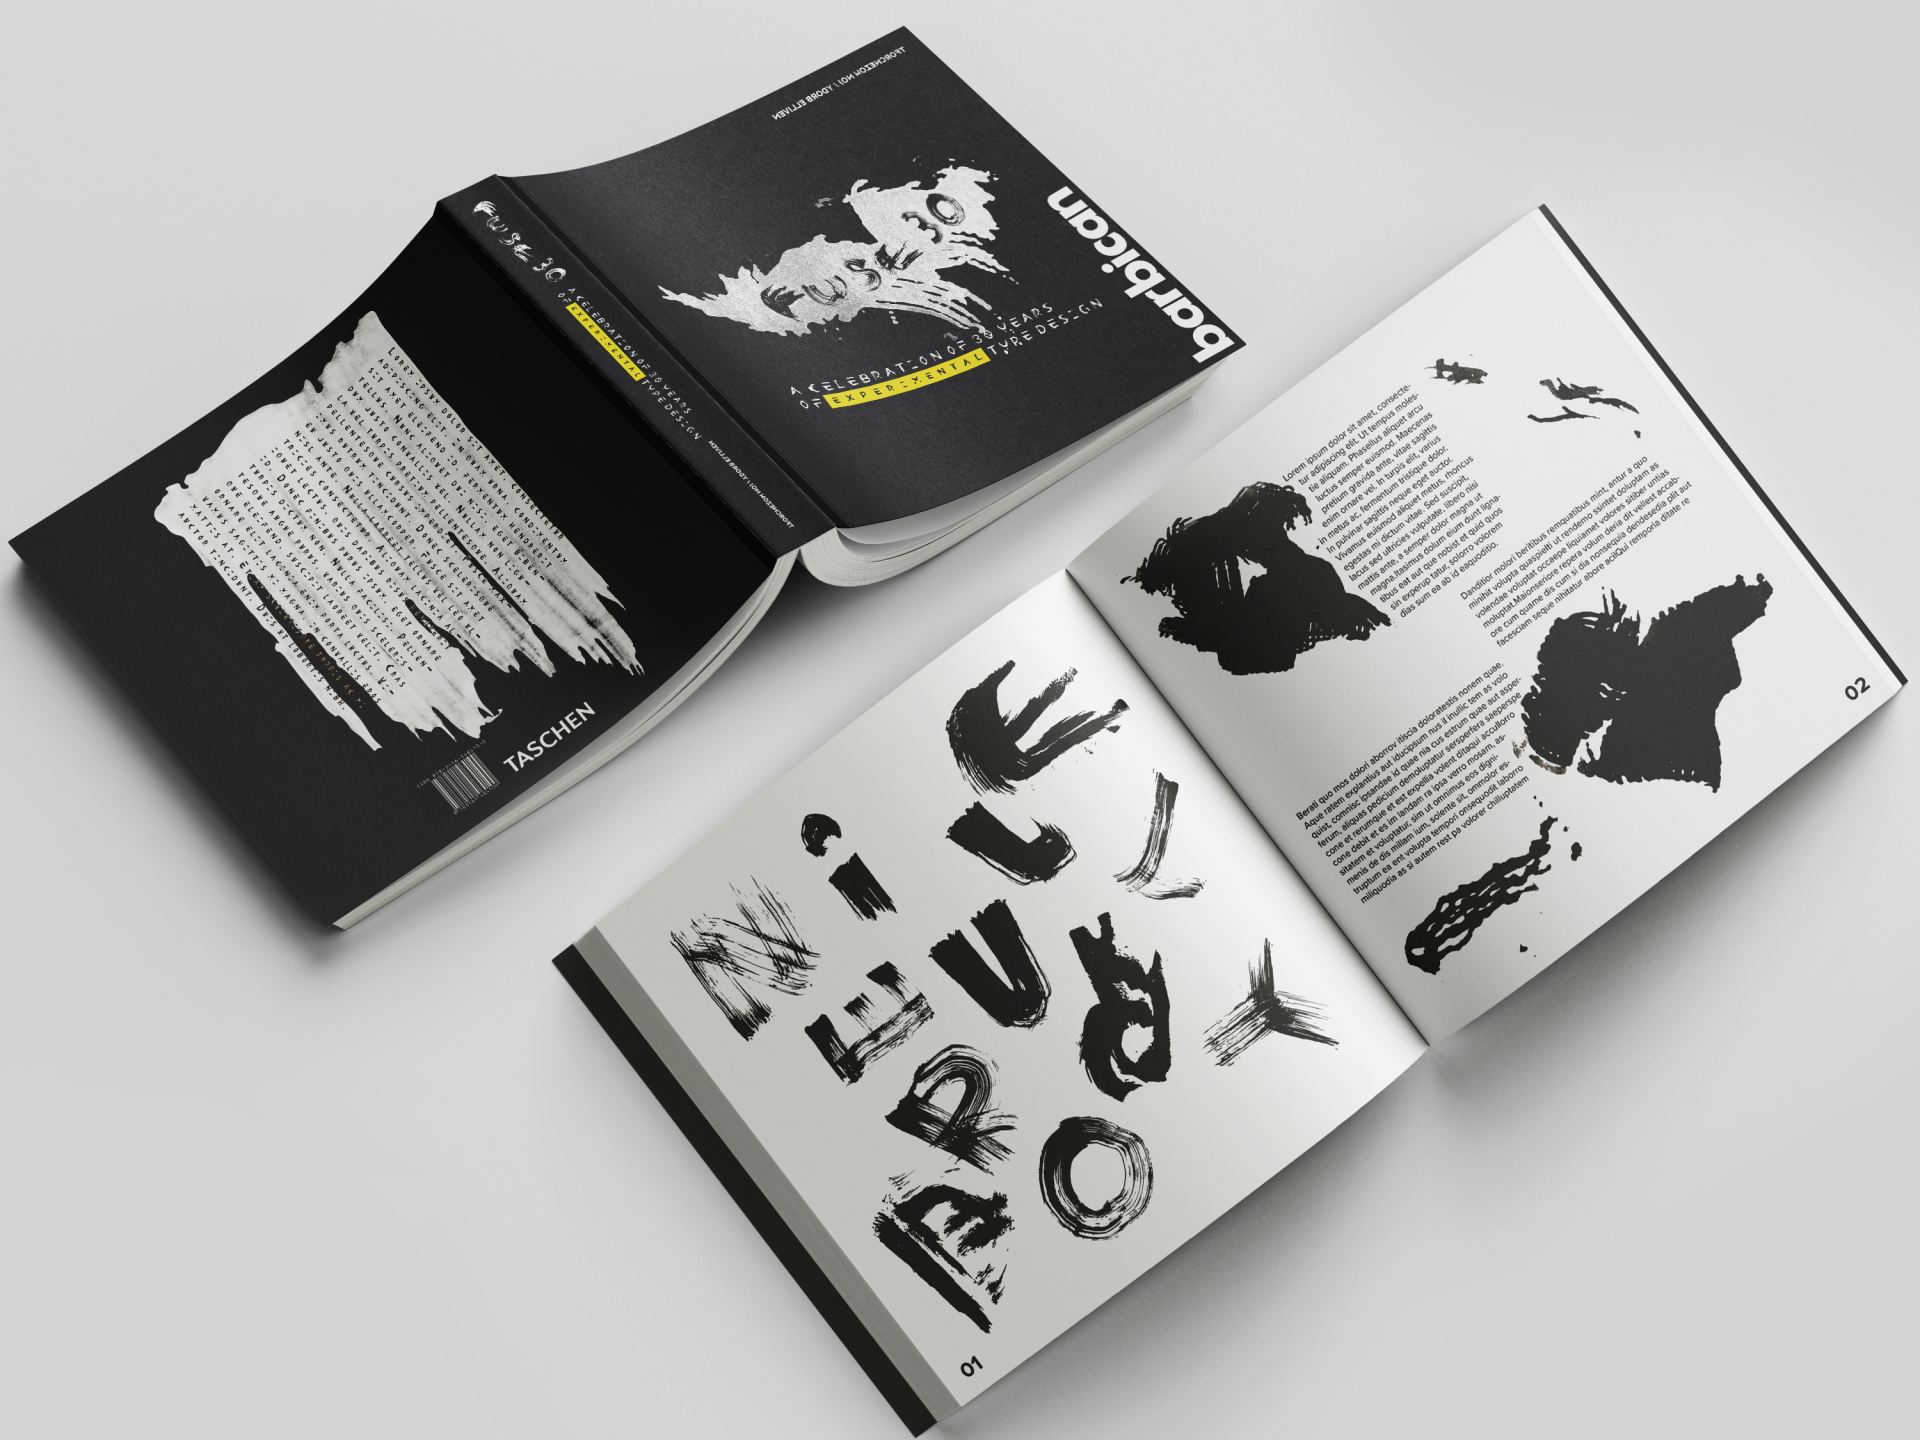 Fuse 30 - Branding and Book design - To celebrate 30 years of Fuse, we created a book design and branding to embody the message Fuse always had which is to challenge readability and typography.